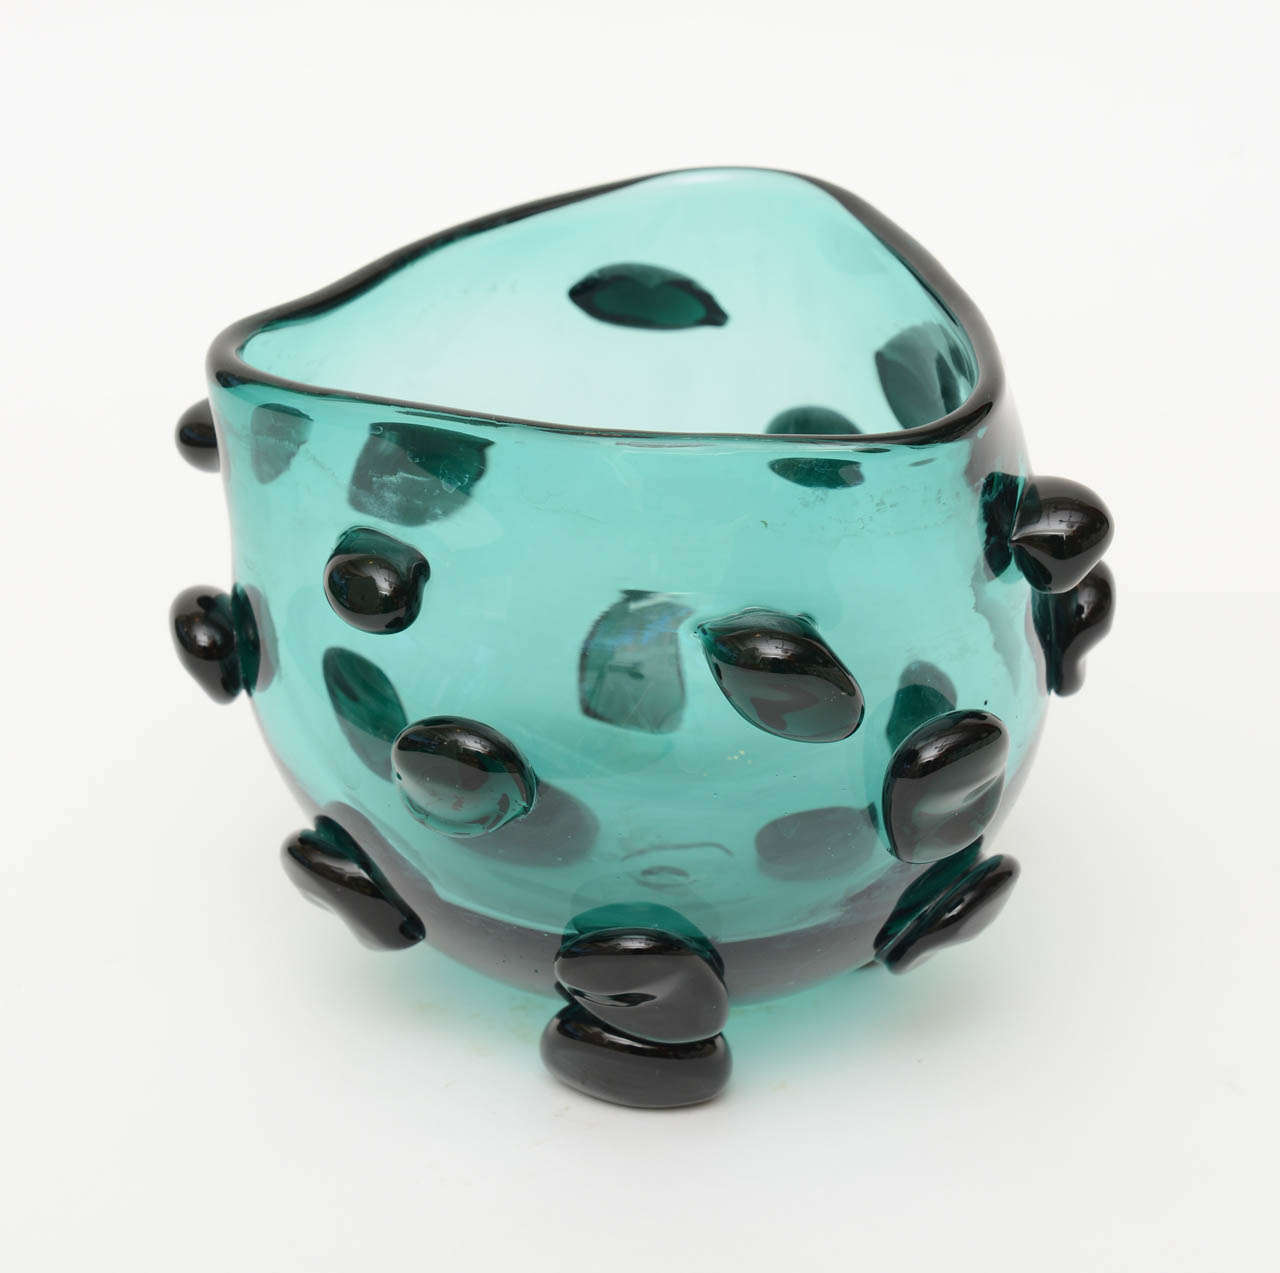 This fabulous bowl/vessel by Blenko has wonderful glass appendages attached in free form design.

it is a cross between teal blue and teal green.... depending on the light.
The glass appendages are a darker green black.
It is a piece of art and